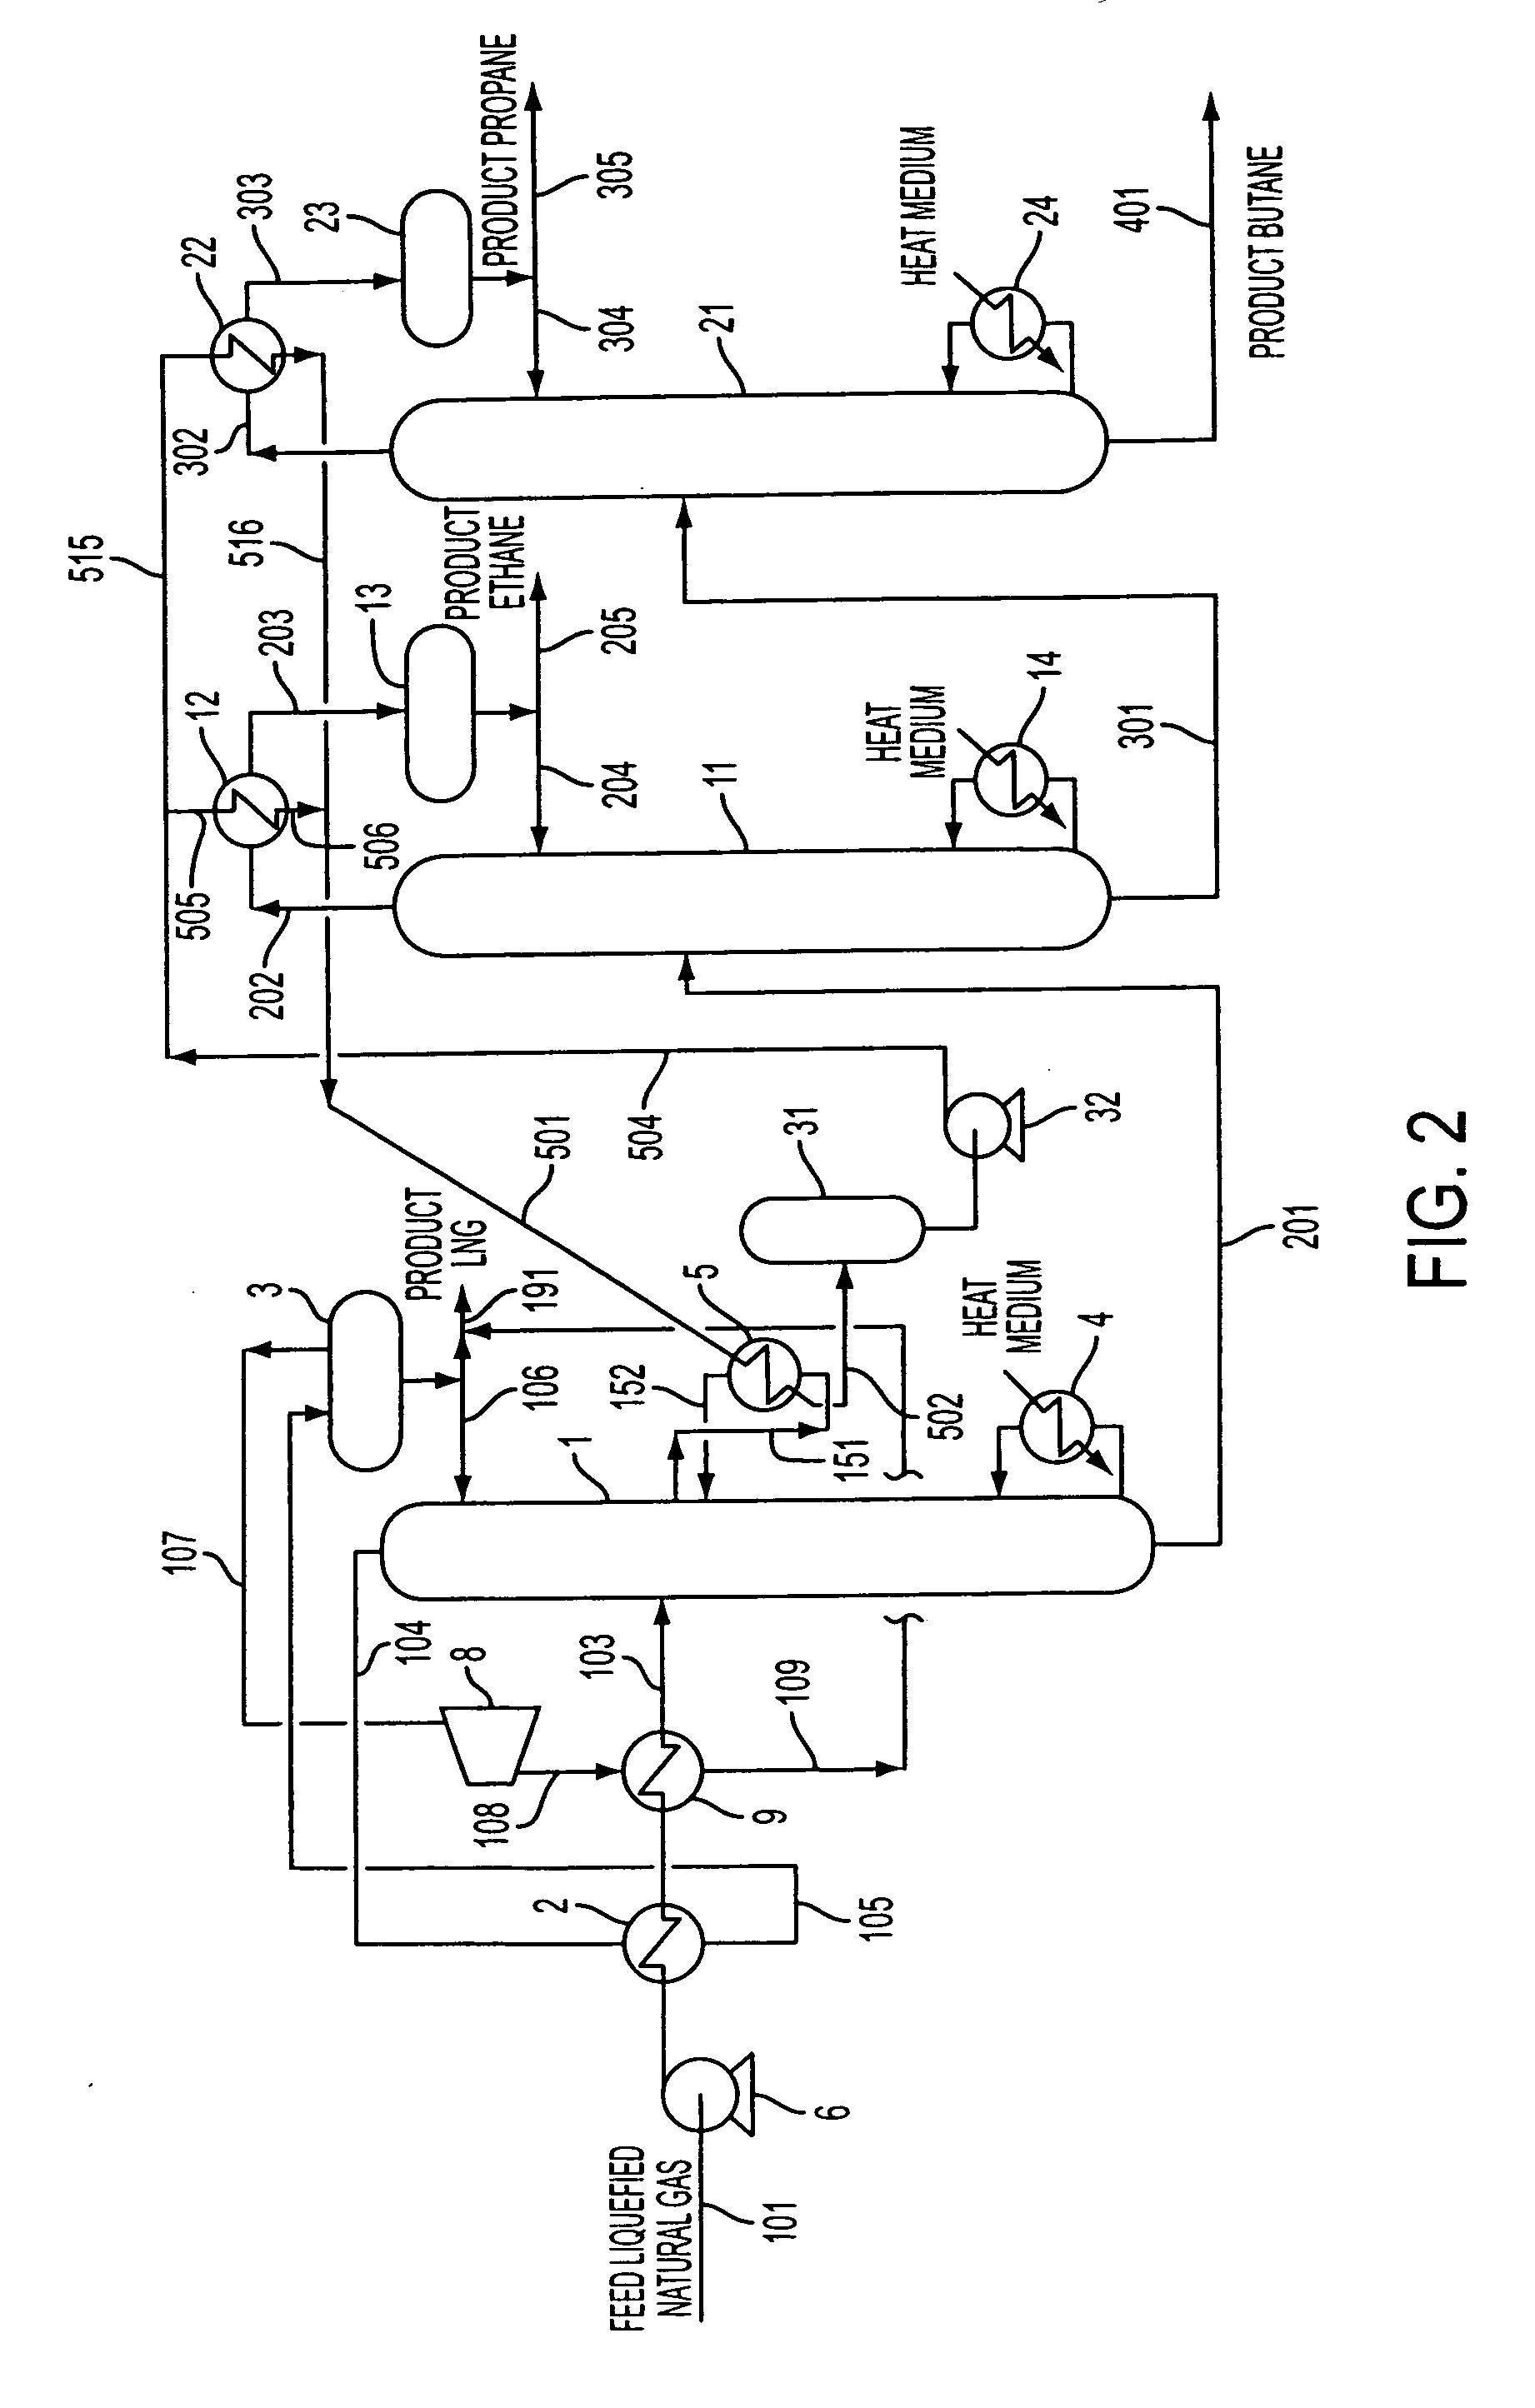 Process and apparatus for separation of hydrocarbons from liquefied natural gas